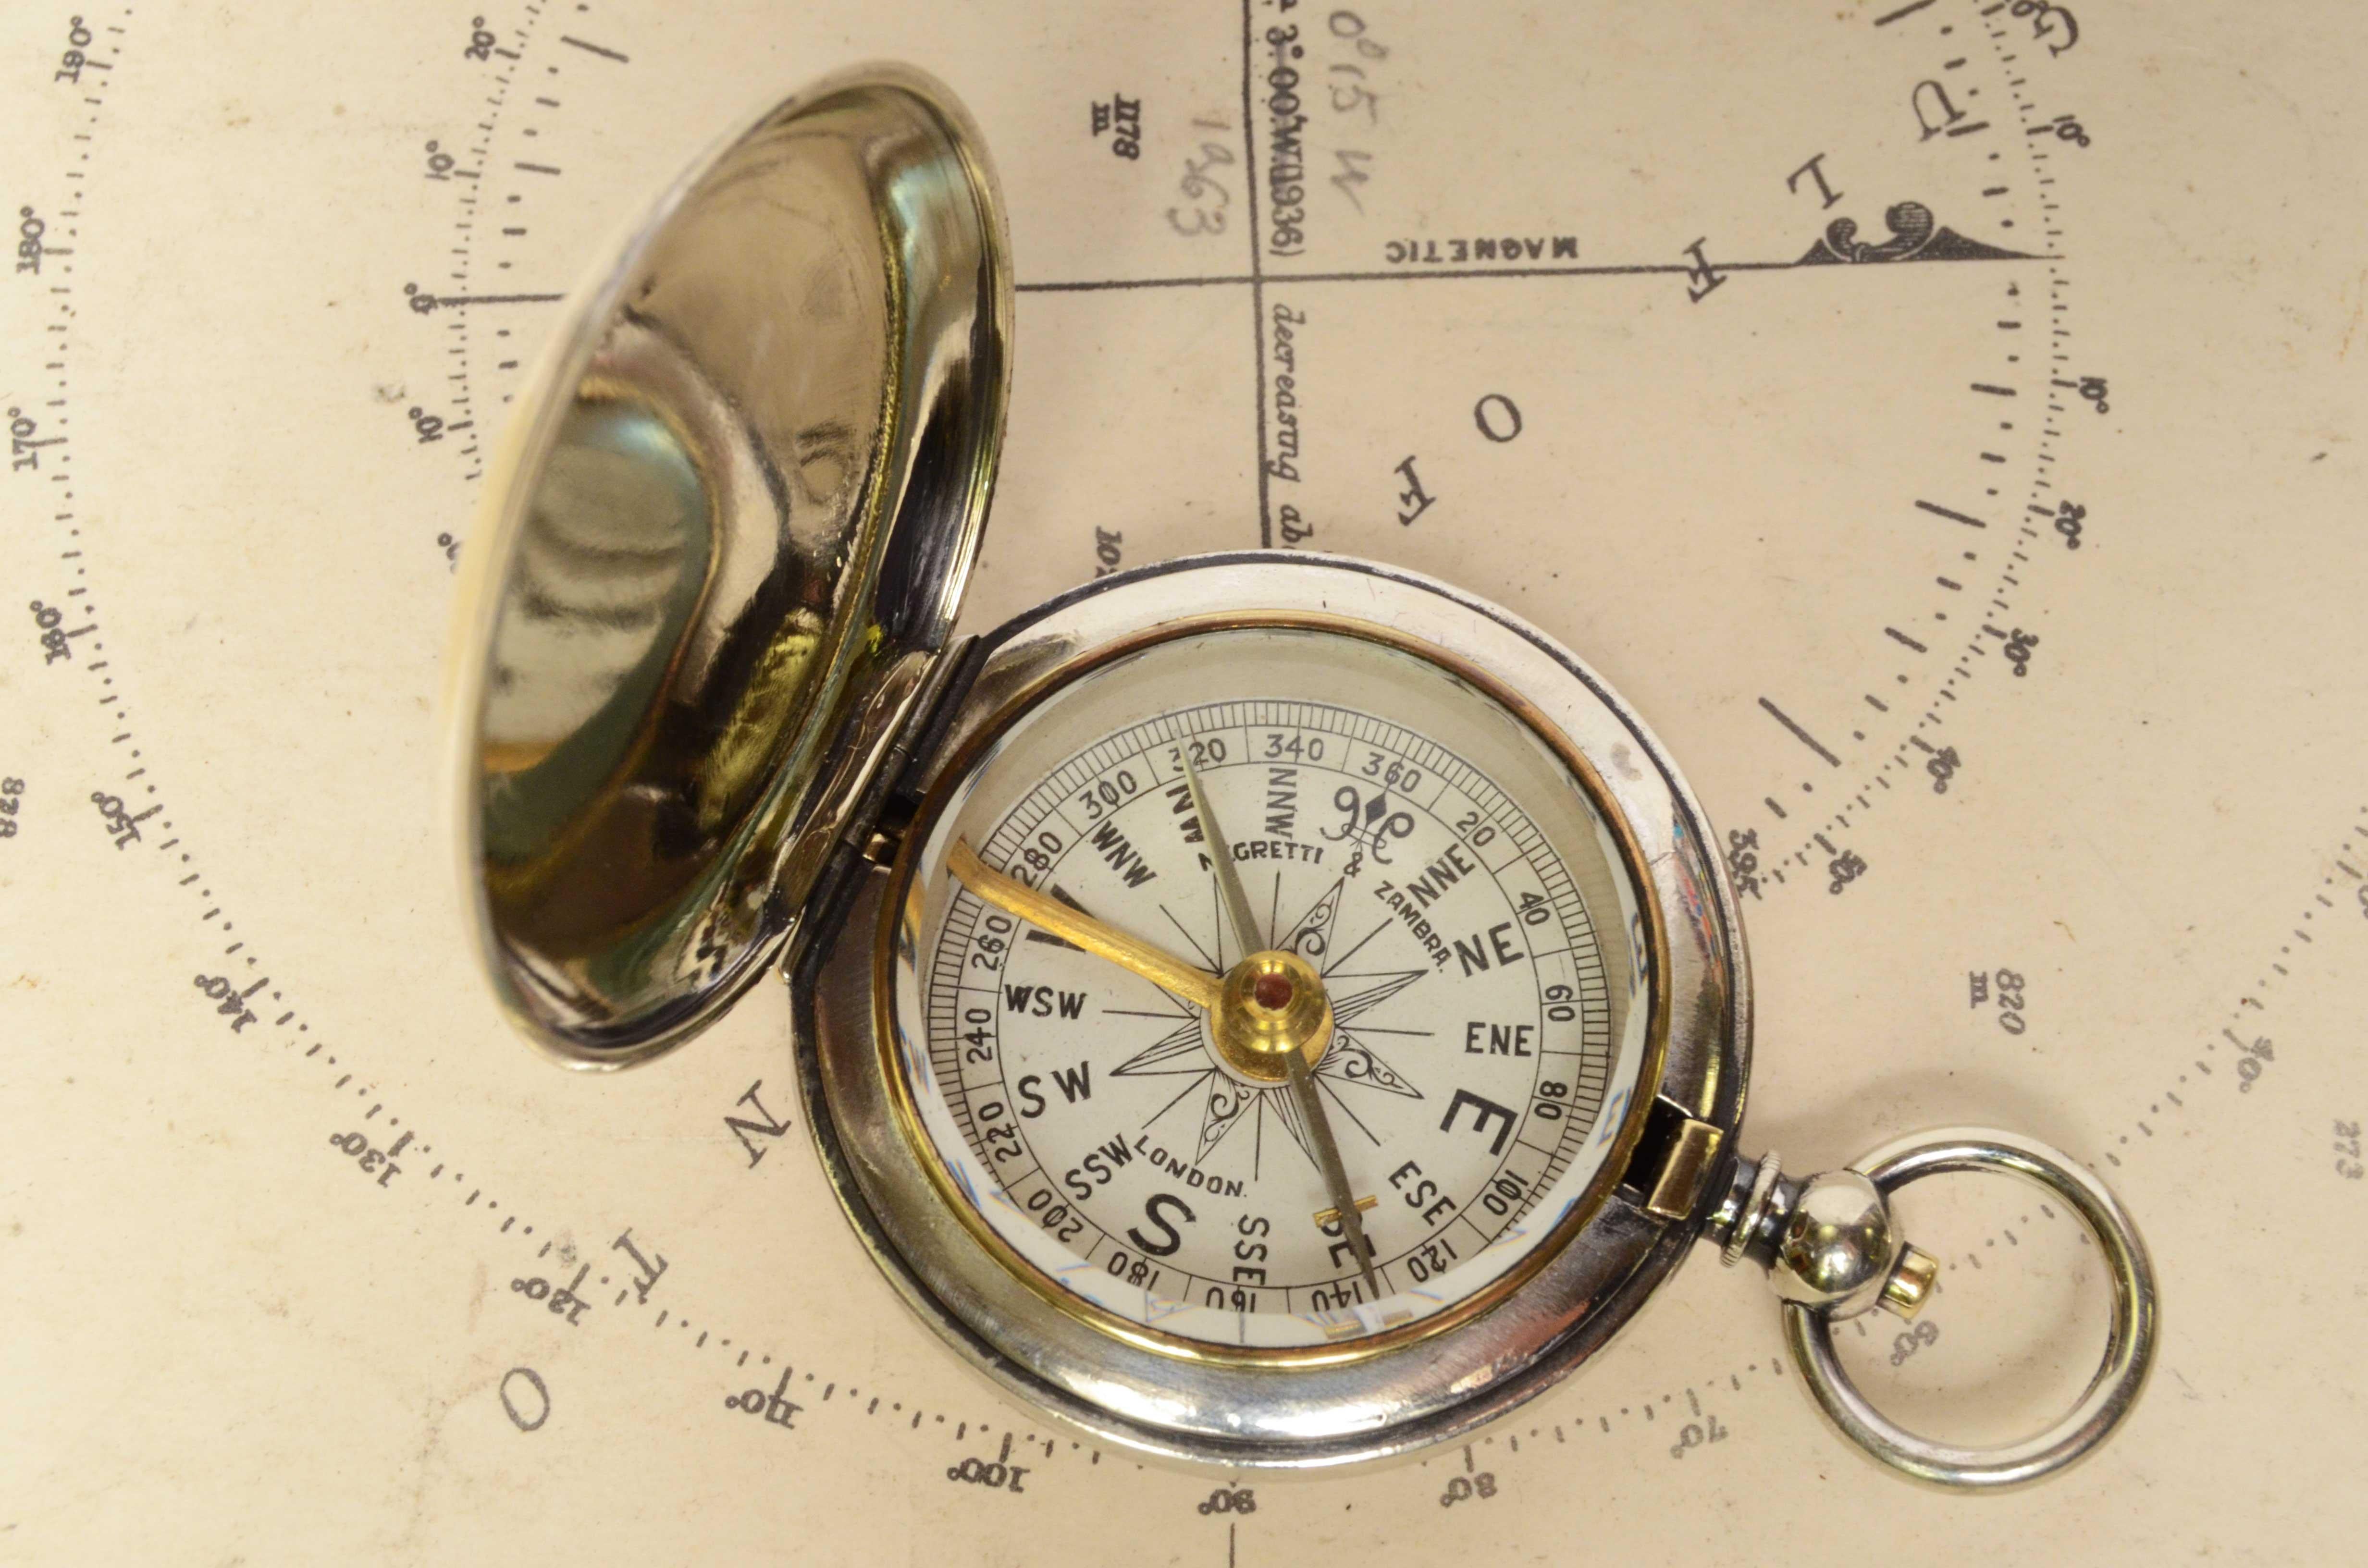 Small pocket and travel compass made of chromed brass, supplied to British army officier during the First World War. Compass in the shape of a pocket watch, equipped with a lid with snap closure with release button inside the ring, the instrument